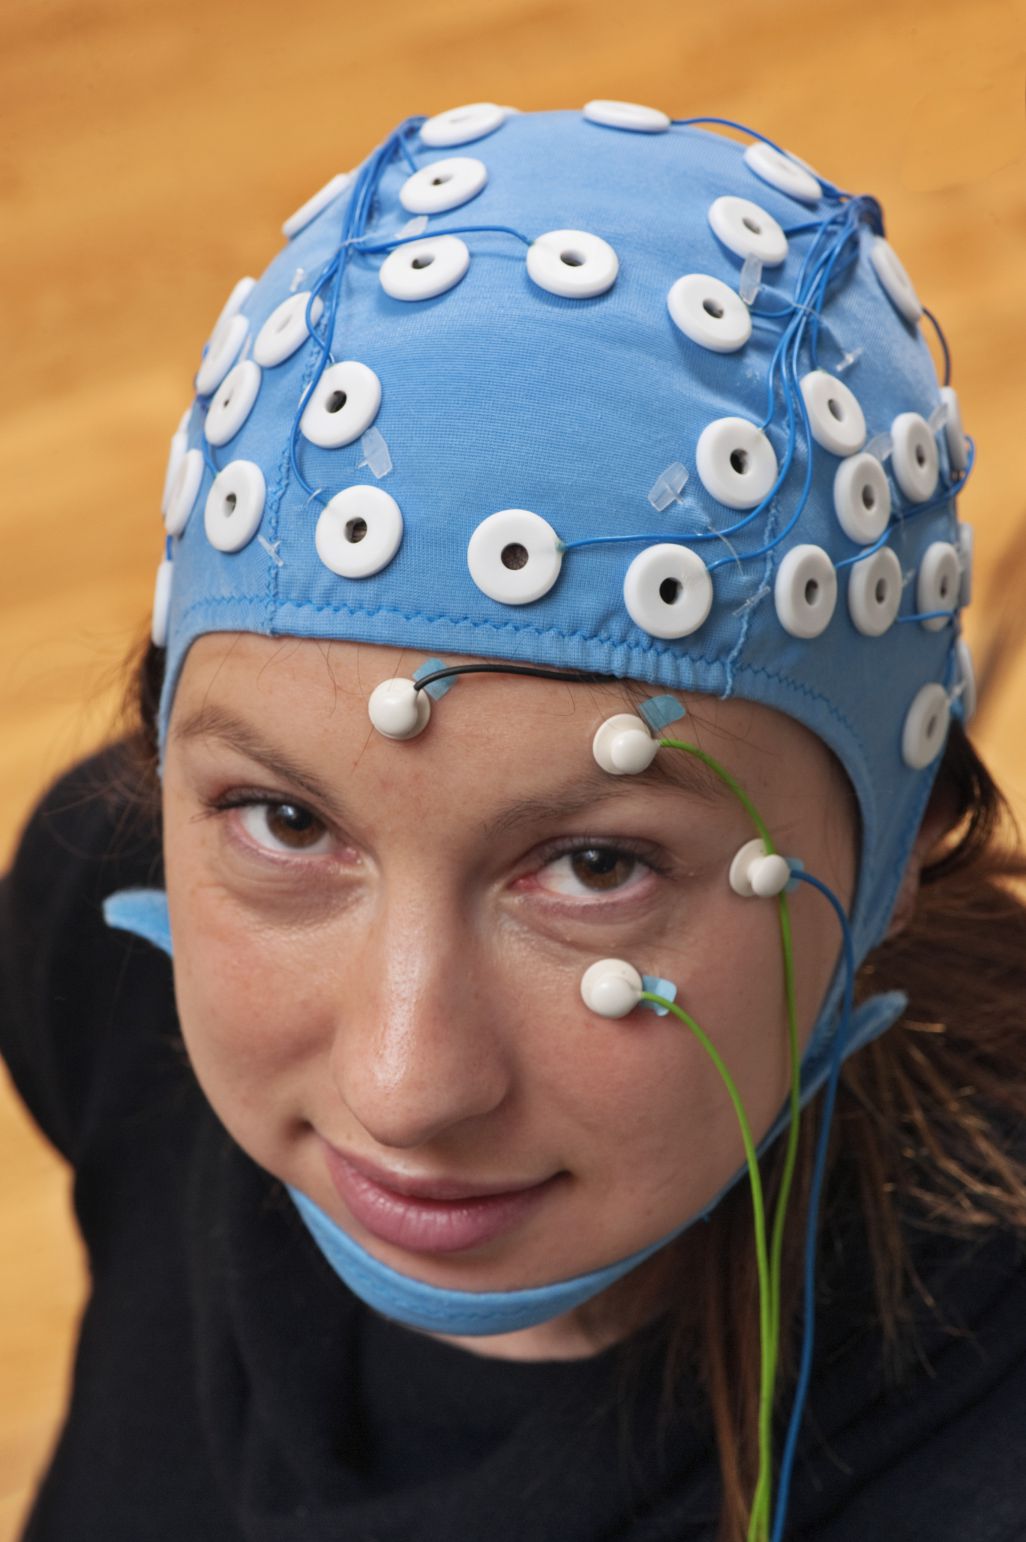 Woman wearing a cap fitted with a network of electrodes for use in electroencephalography (EEG) studies to measure electric current flows within the neurons of different parts of the brain. Photographed at the Oxford Centre for Human Brain Activity, UK.